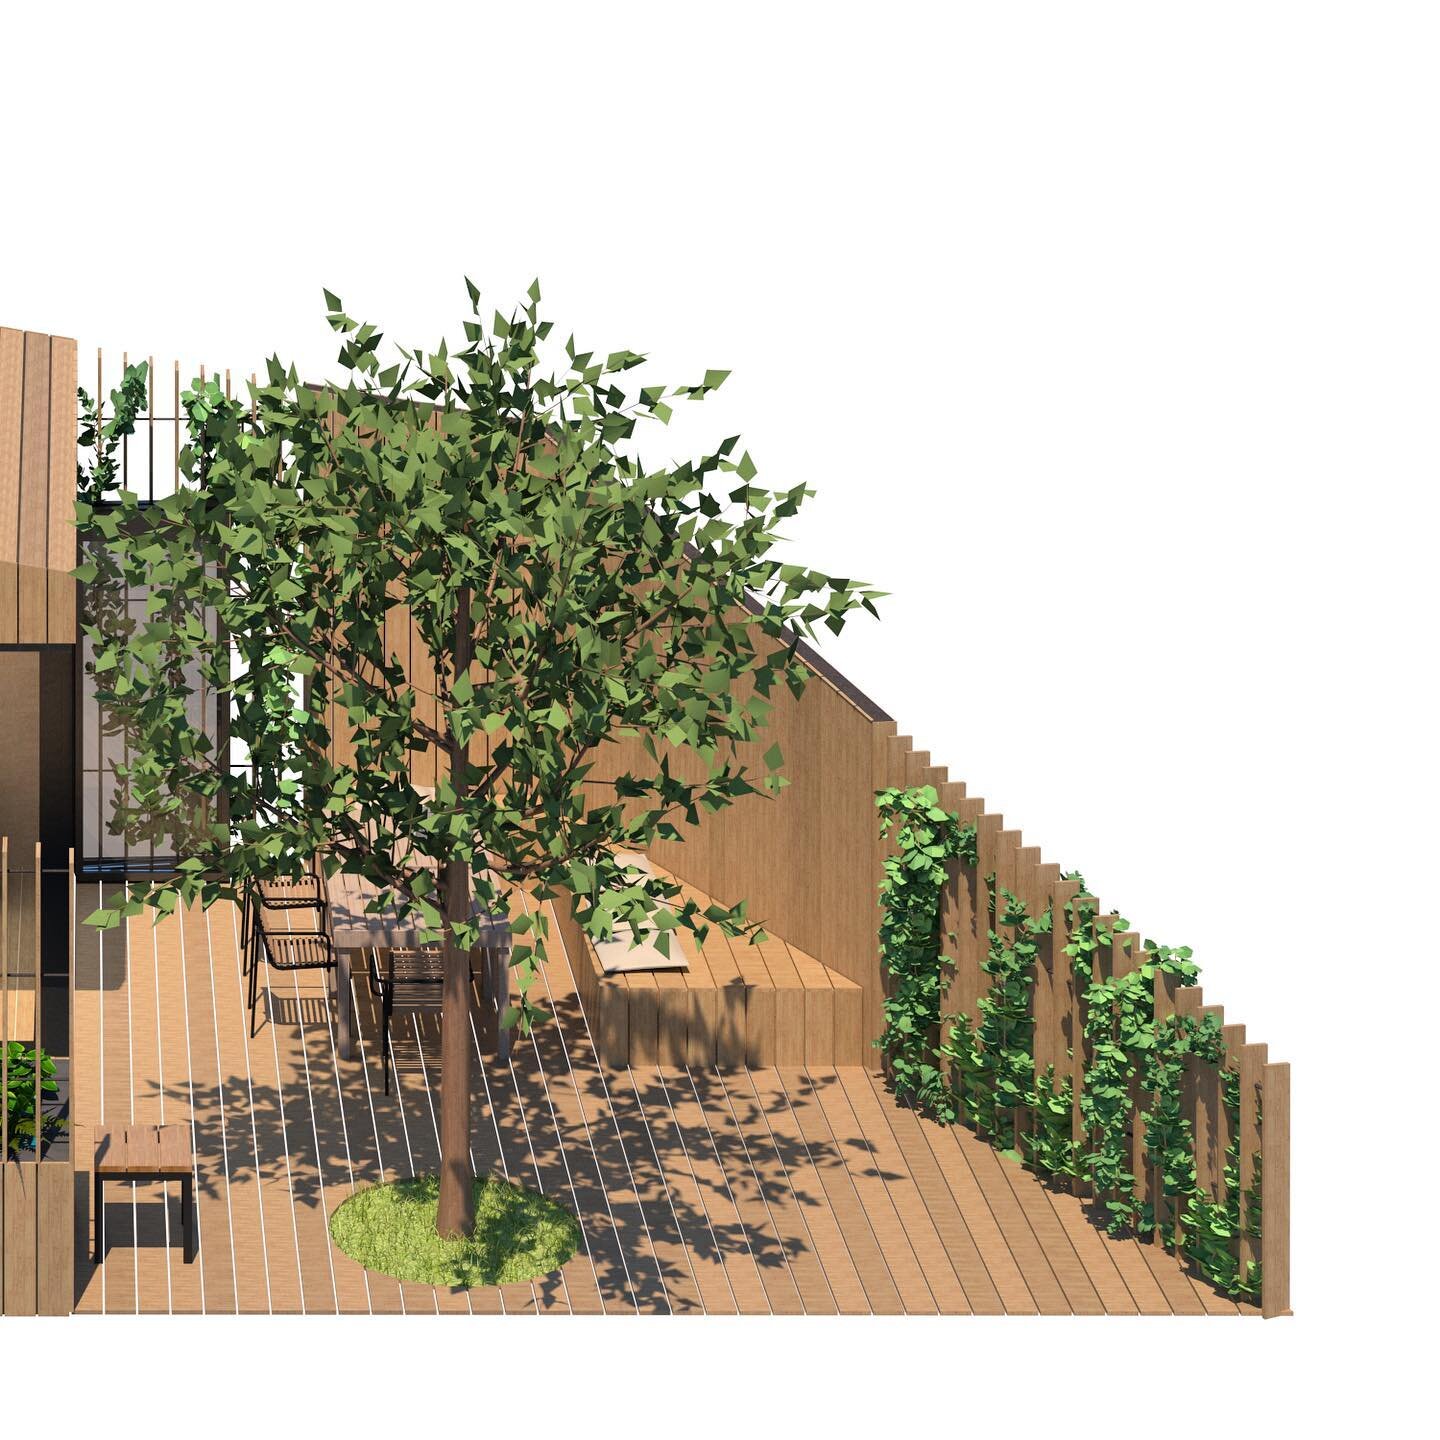 Sunk is a small house, a home in a garden, Almere, 2022
#architecture #architect #arquitectura #archilovers #architecturelovers #architecturedaily #smallhome #smallhouse #kleinwonen #kleinwonensmallhomes #home #huis #thuis #bouwexpotinyhousing #bouwe